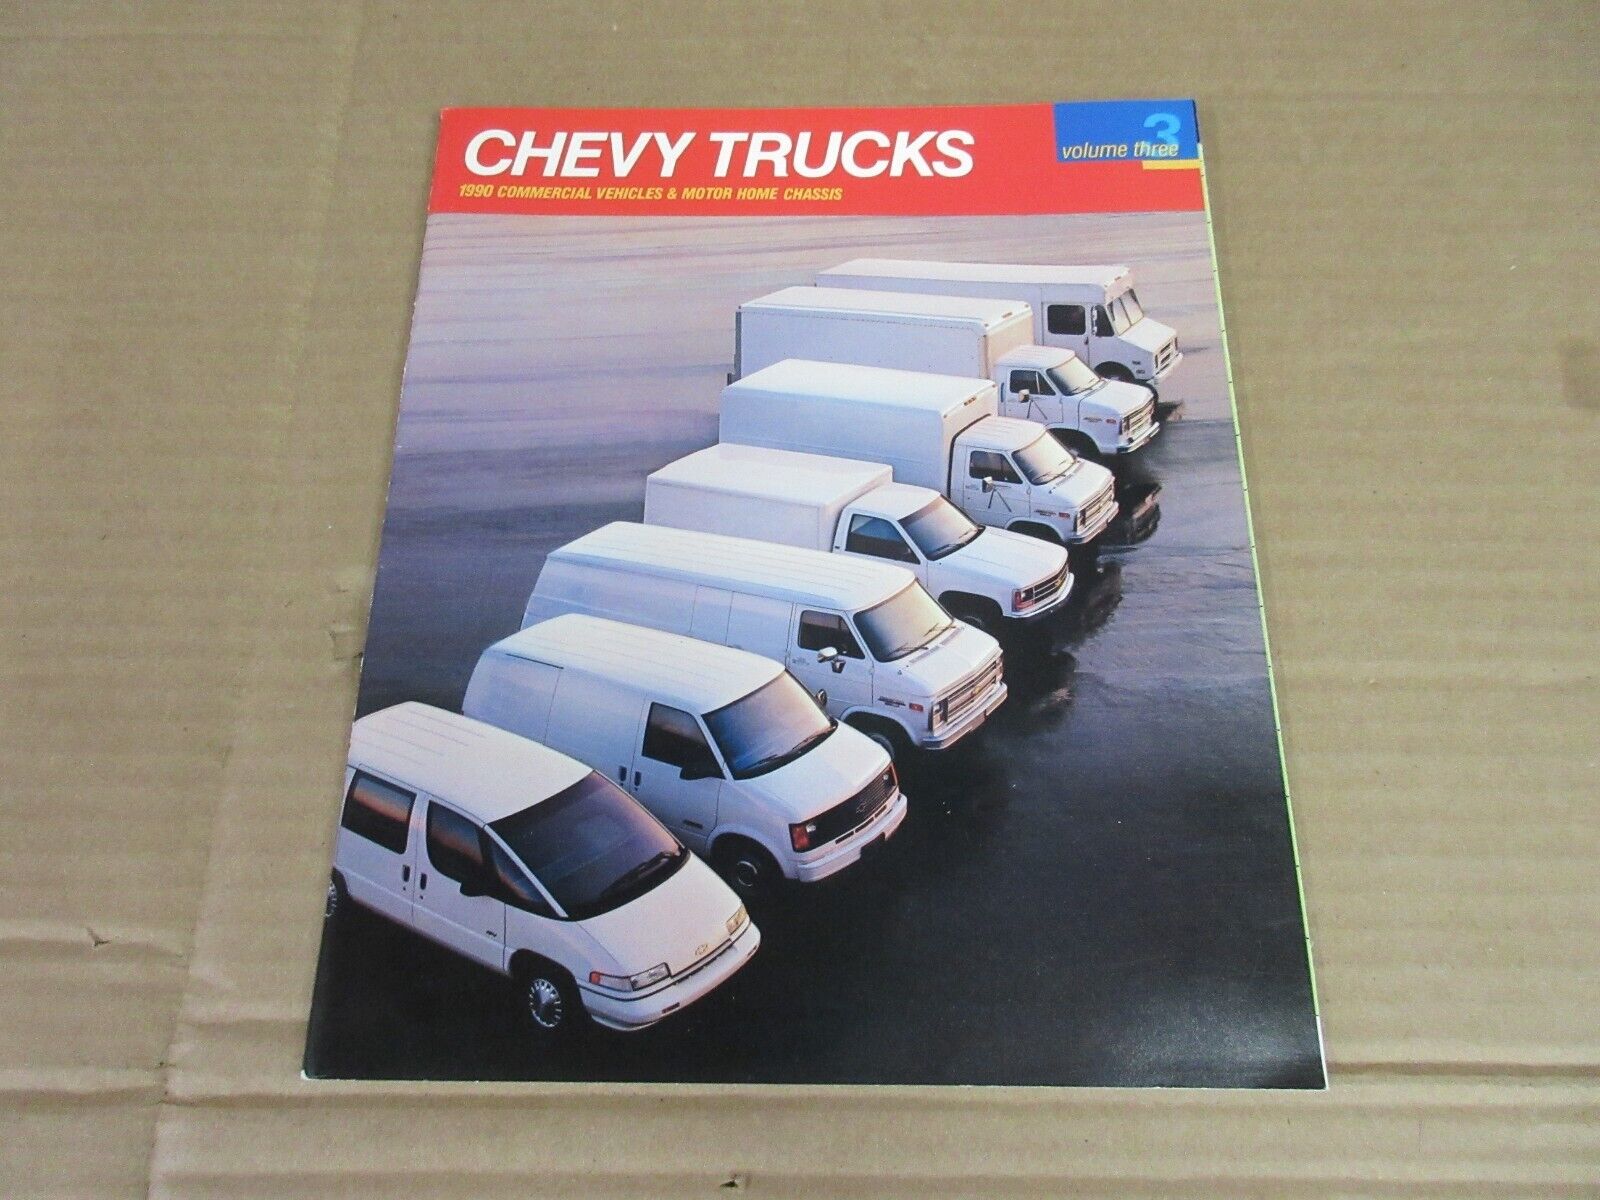 Vintage 1990 Chevy Trucks Commercial Vehicles and Motor Homes Chassis Vol 3   E3